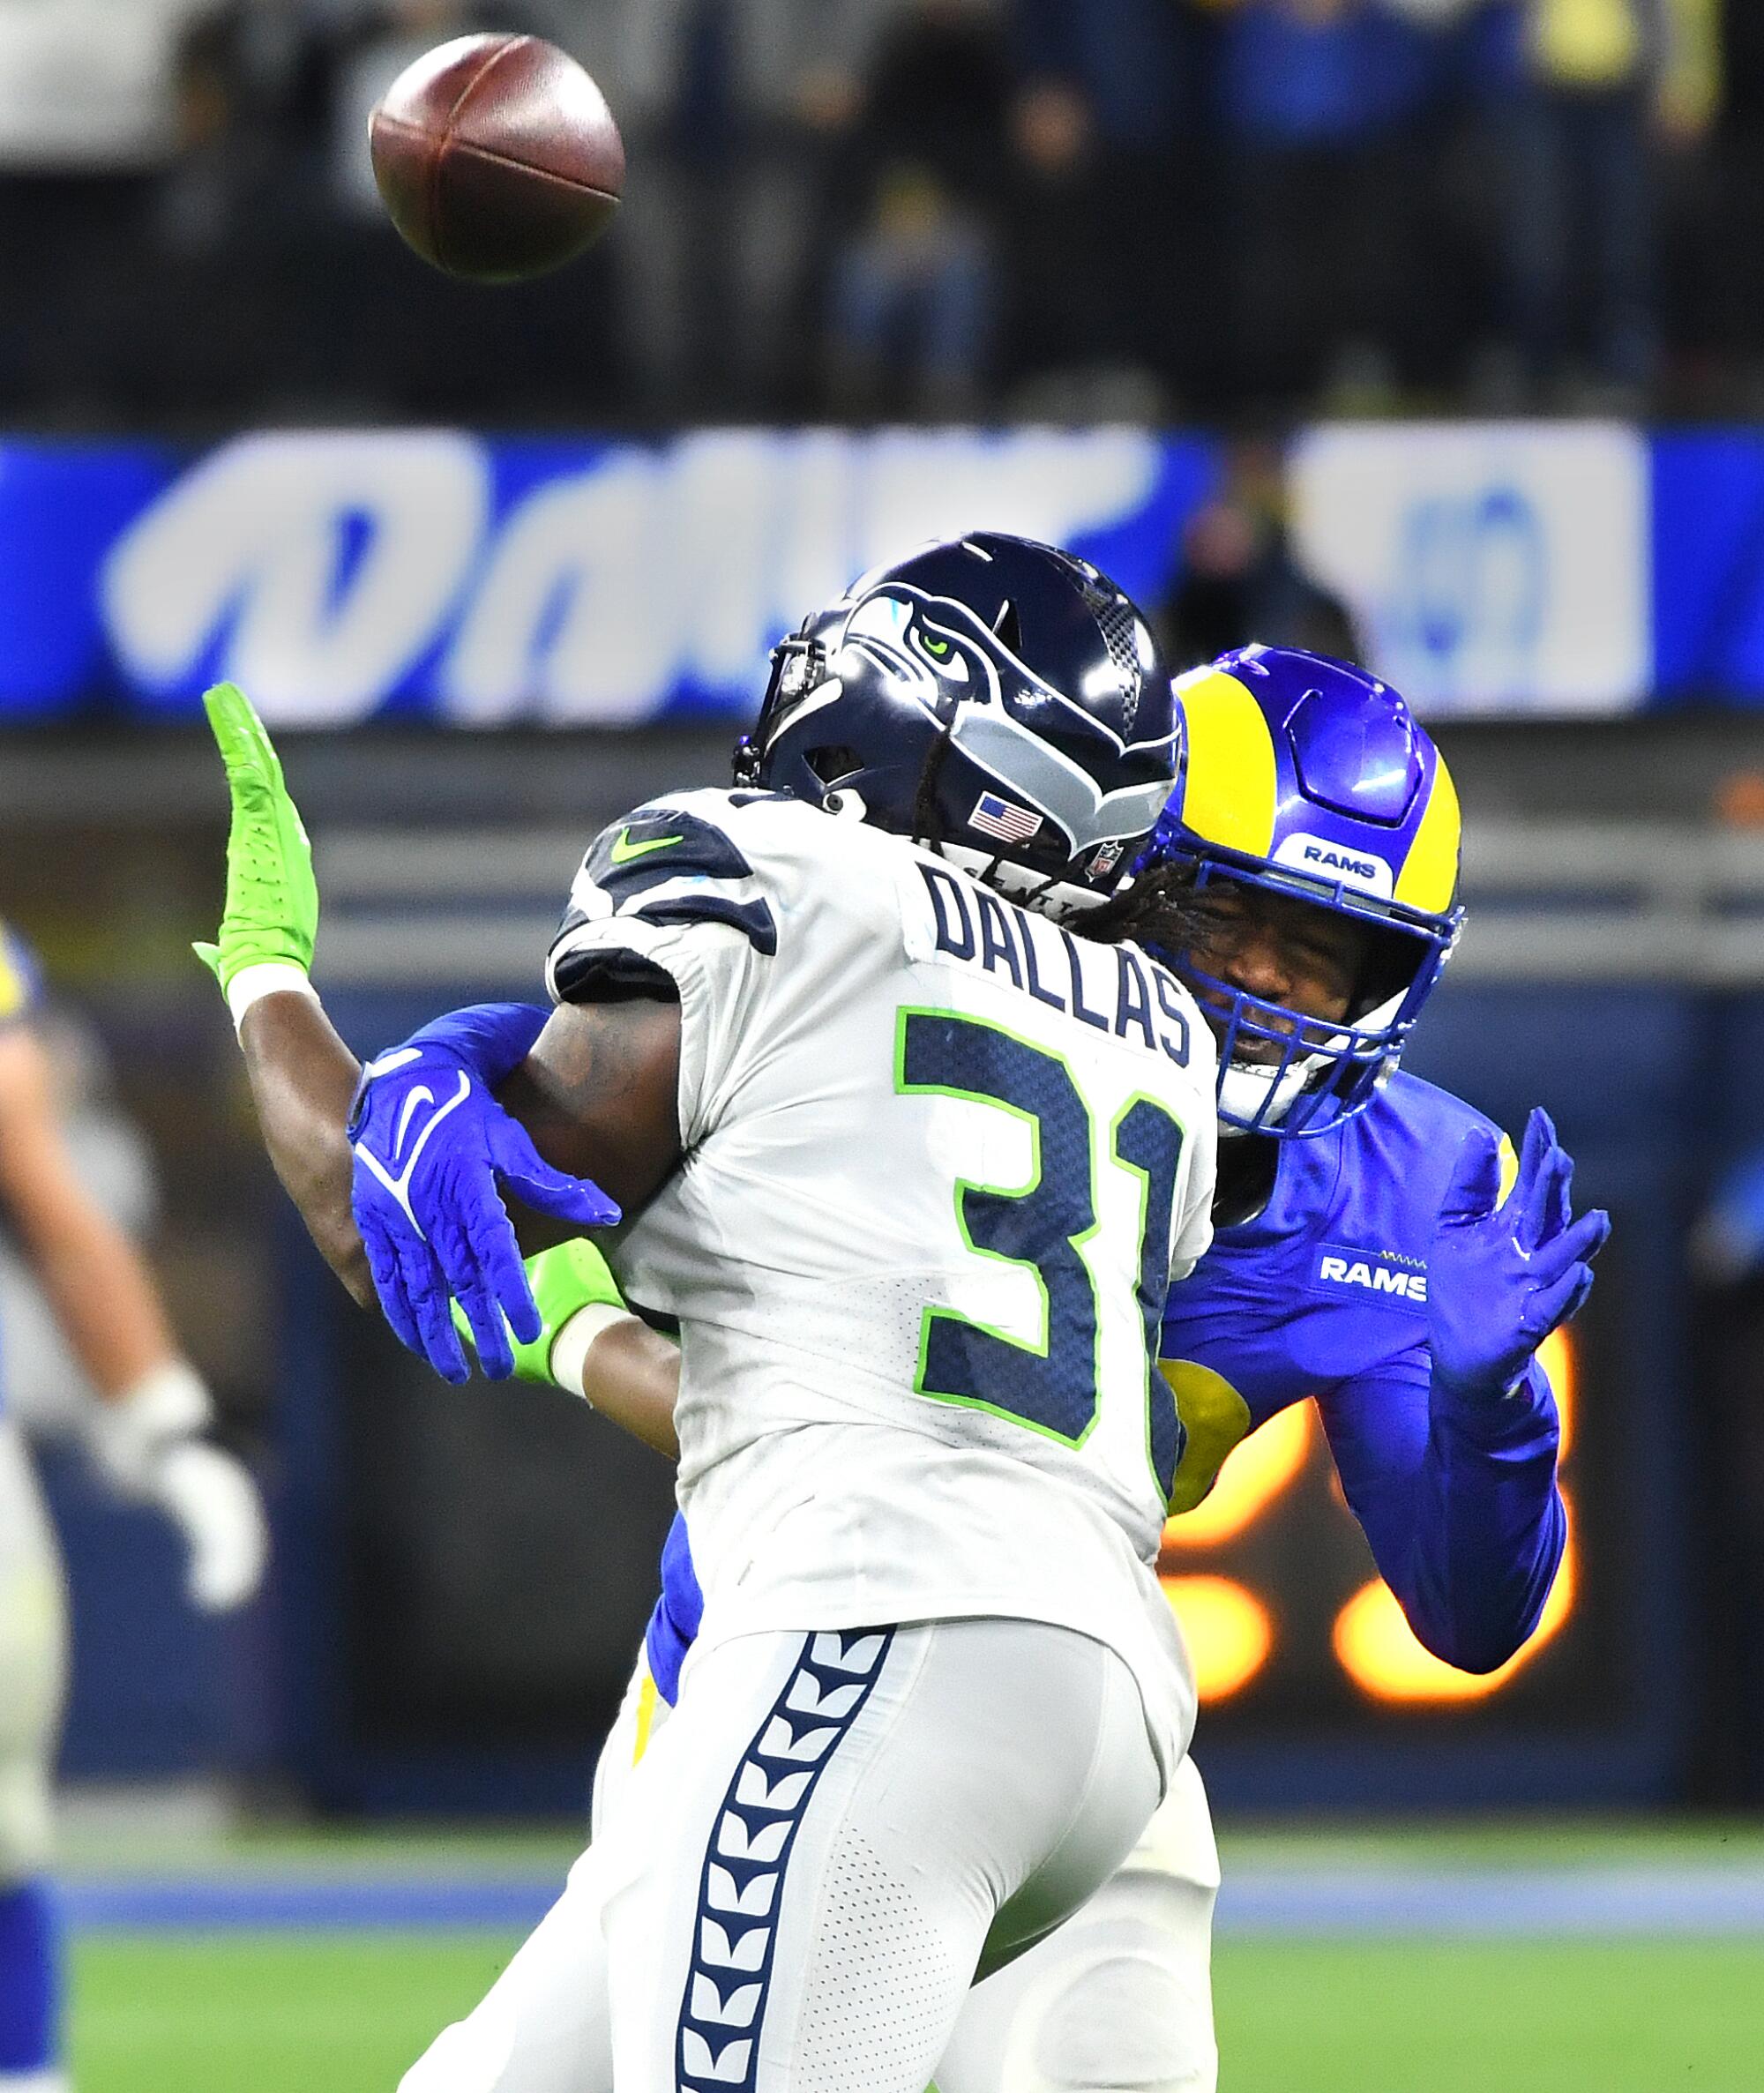 Rams linebacker Ernest Jones prevents Seahawks running back DeeJay Dallas from catching a pass.